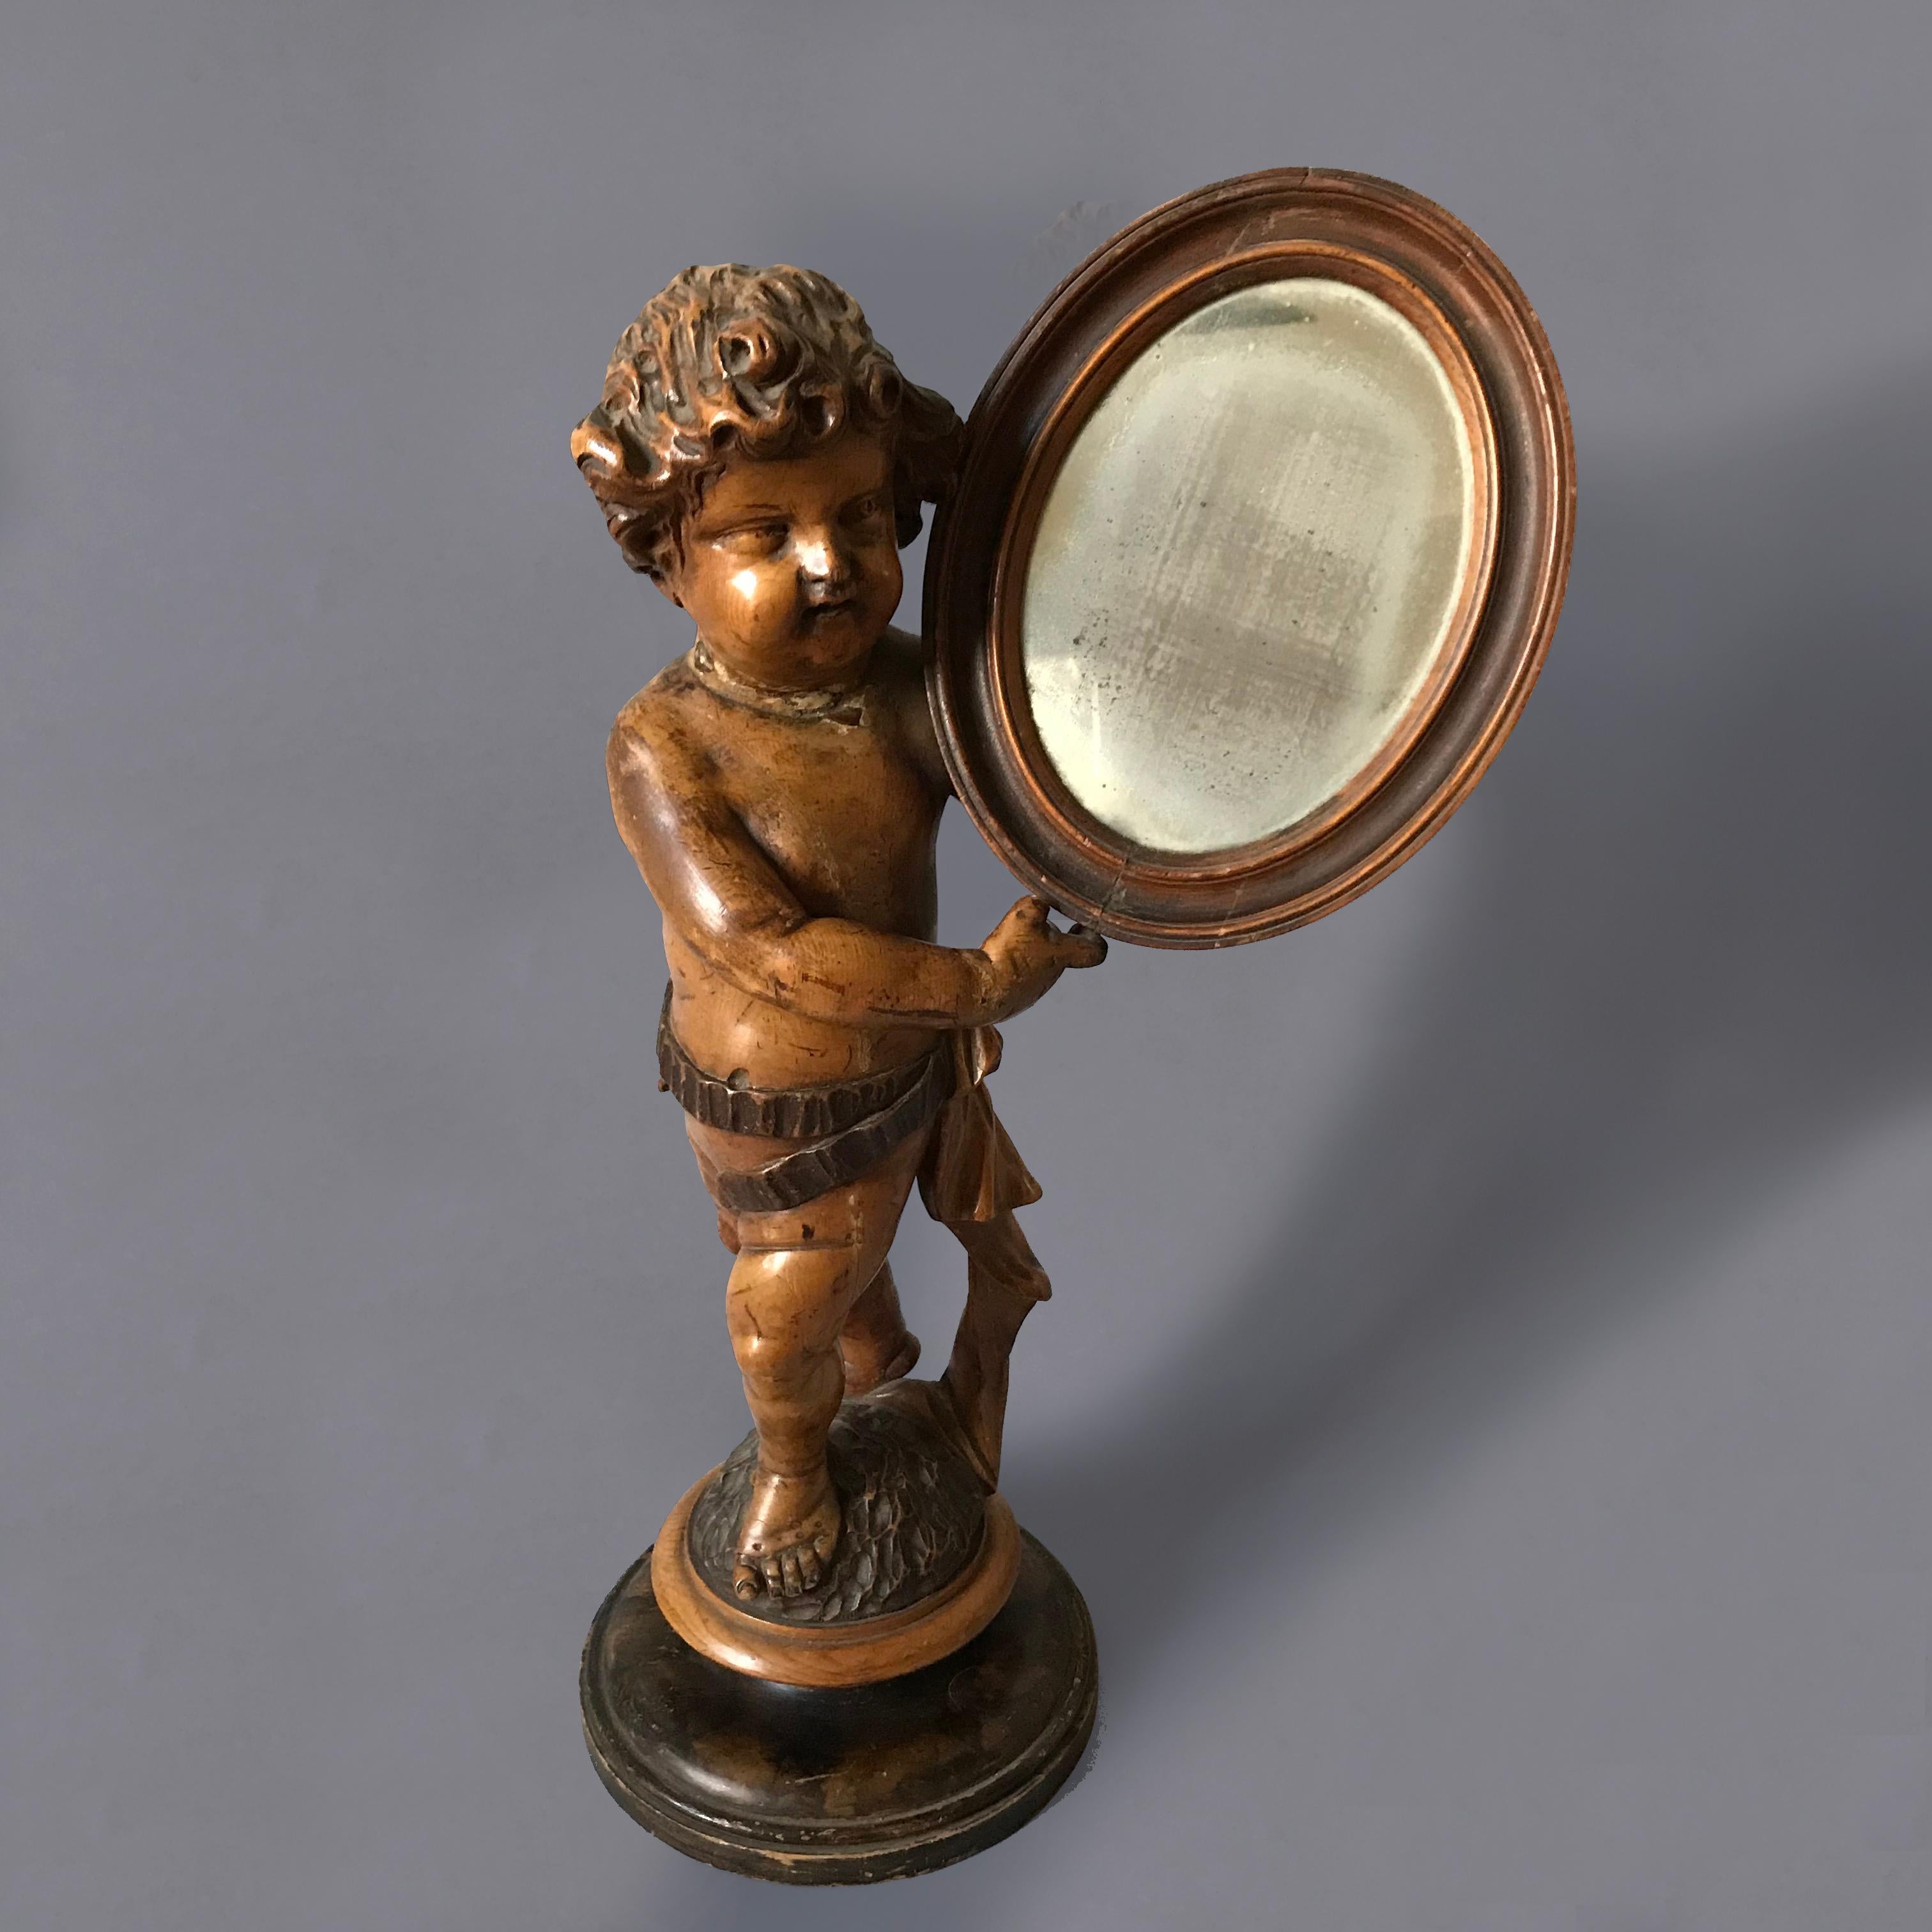 Beautifully carved Italian mid-C19th limewood cherub, or putto, holding a mirror with its original wonderfully foxed plate.